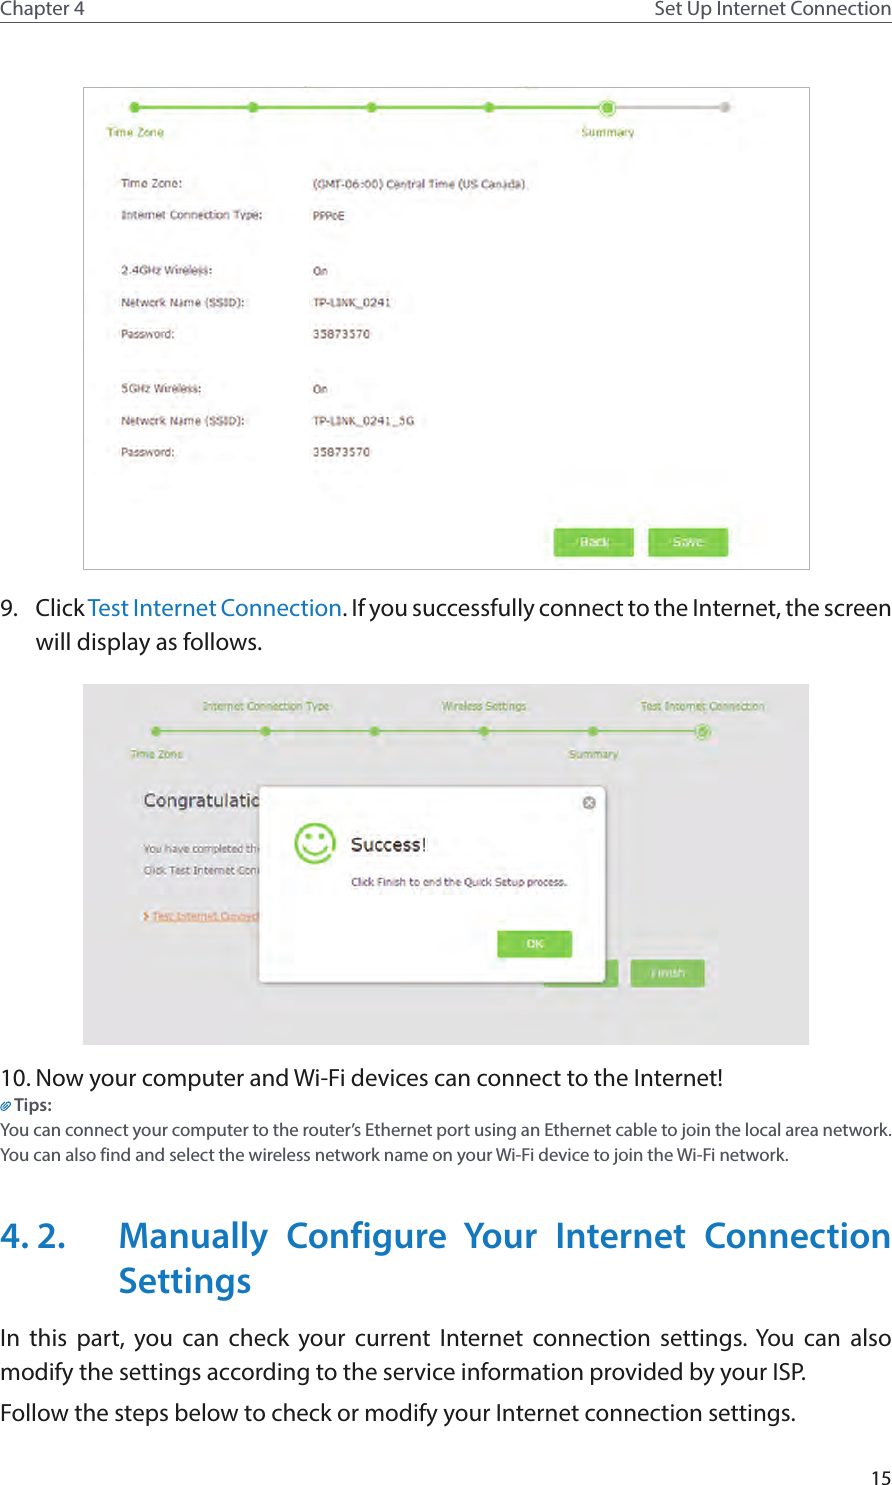 15Chapter 4 Set Up Internet Connection9.  Click Test Internet Connection. If you successfully connect to the Internet, the screen will display as follows.10. Now your computer and Wi-Fi devices can connect to the Internet!Tips:You can connect your computer to the router’s Ethernet port using an Ethernet cable to join the local area network. You can also find and select the wireless network name on your Wi-Fi device to join the Wi-Fi network.4. 2.  Manually Configure Your Internet Connection SettingsIn this part, you can check your current Internet connection settings. You can also modify the settings according to the service information provided by your ISP.Follow the steps below to check or modify your Internet connection settings.